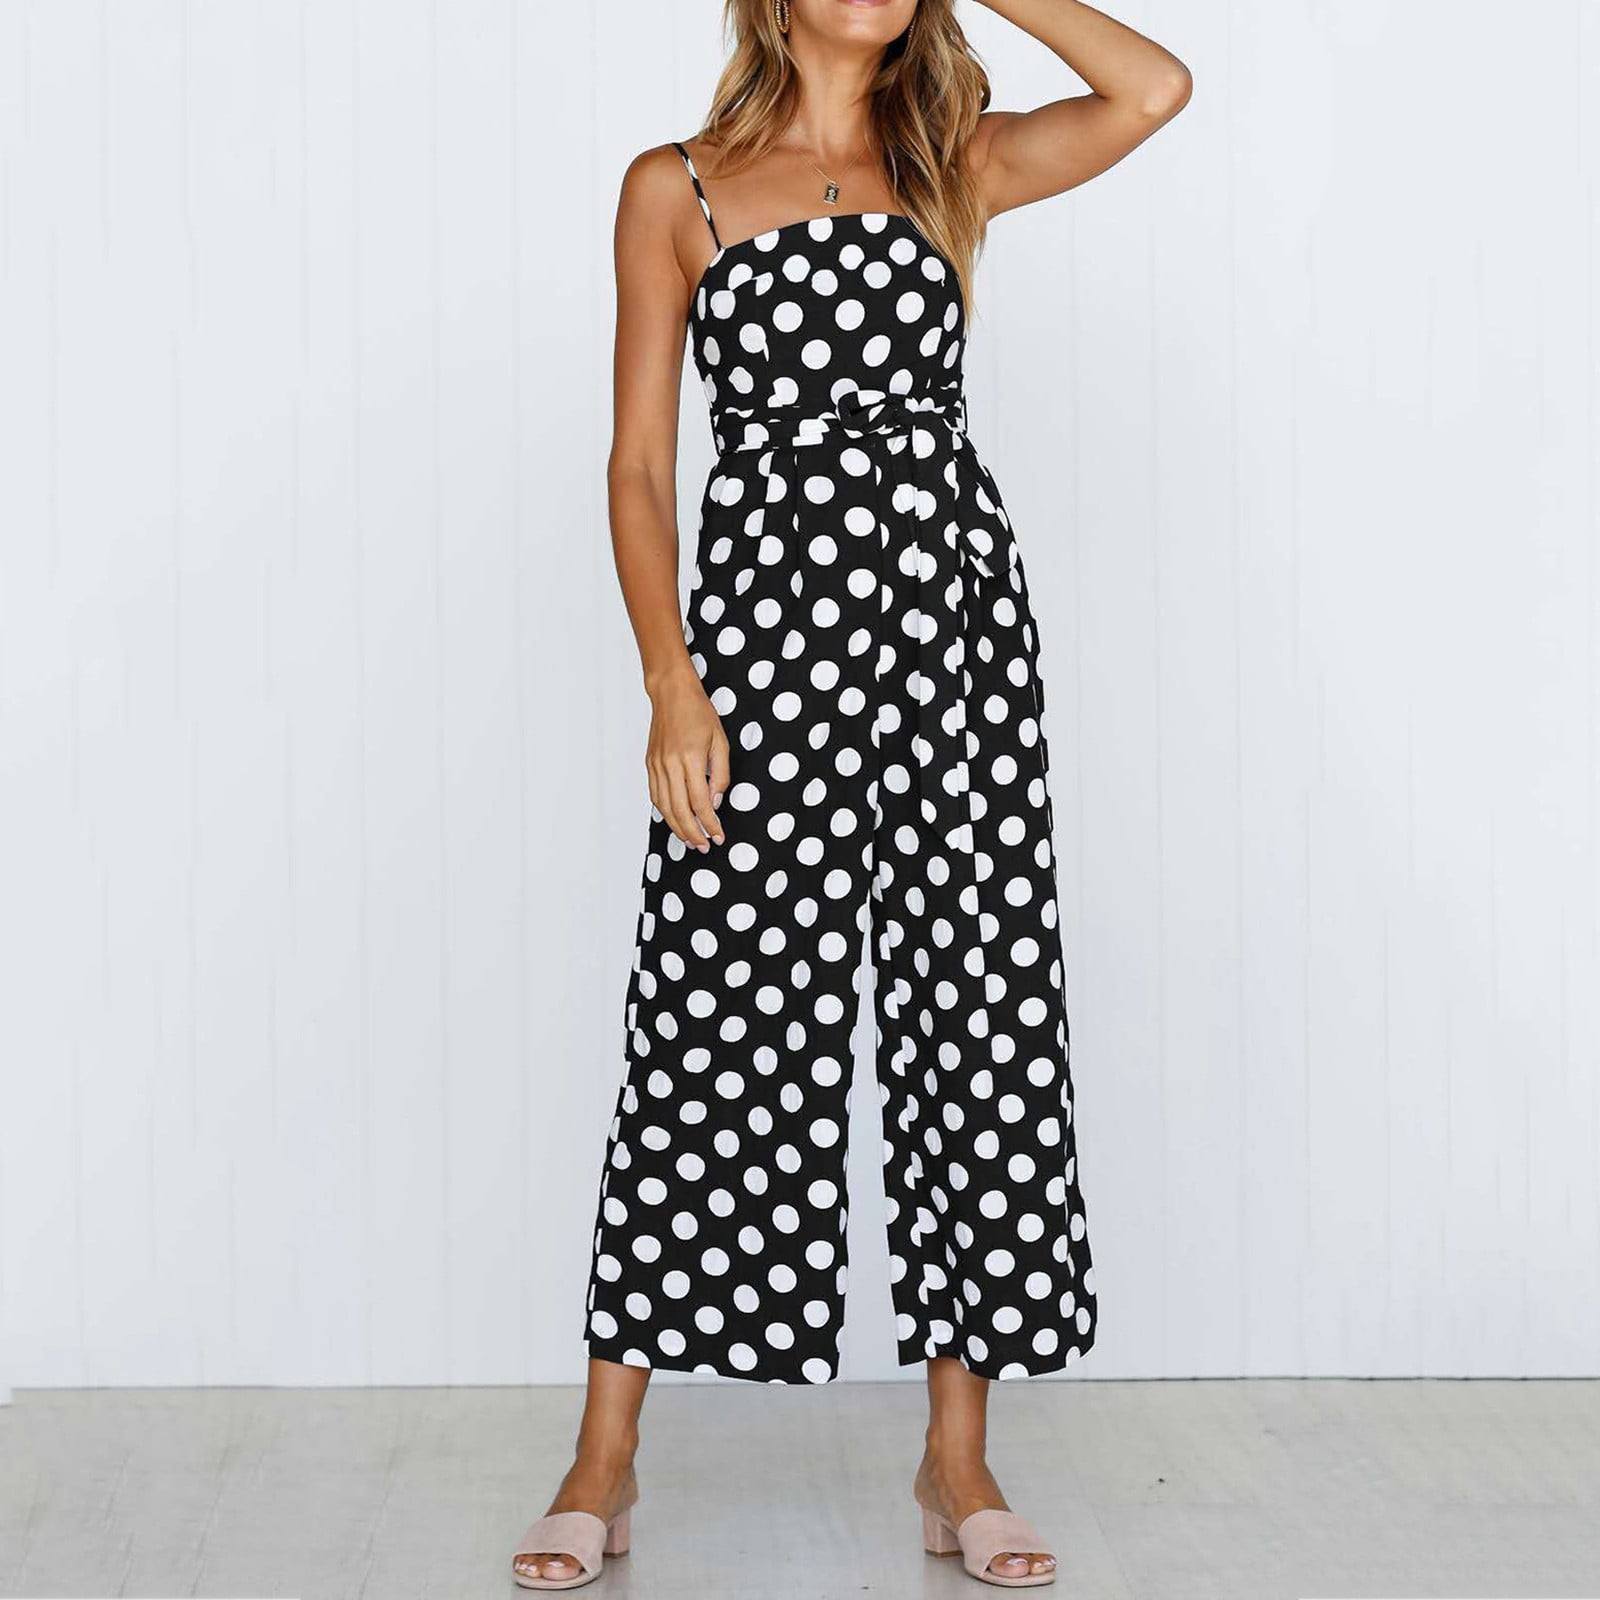 Jumpsuits & Co-ords | Cute Jumpsuit For Women | Freeup